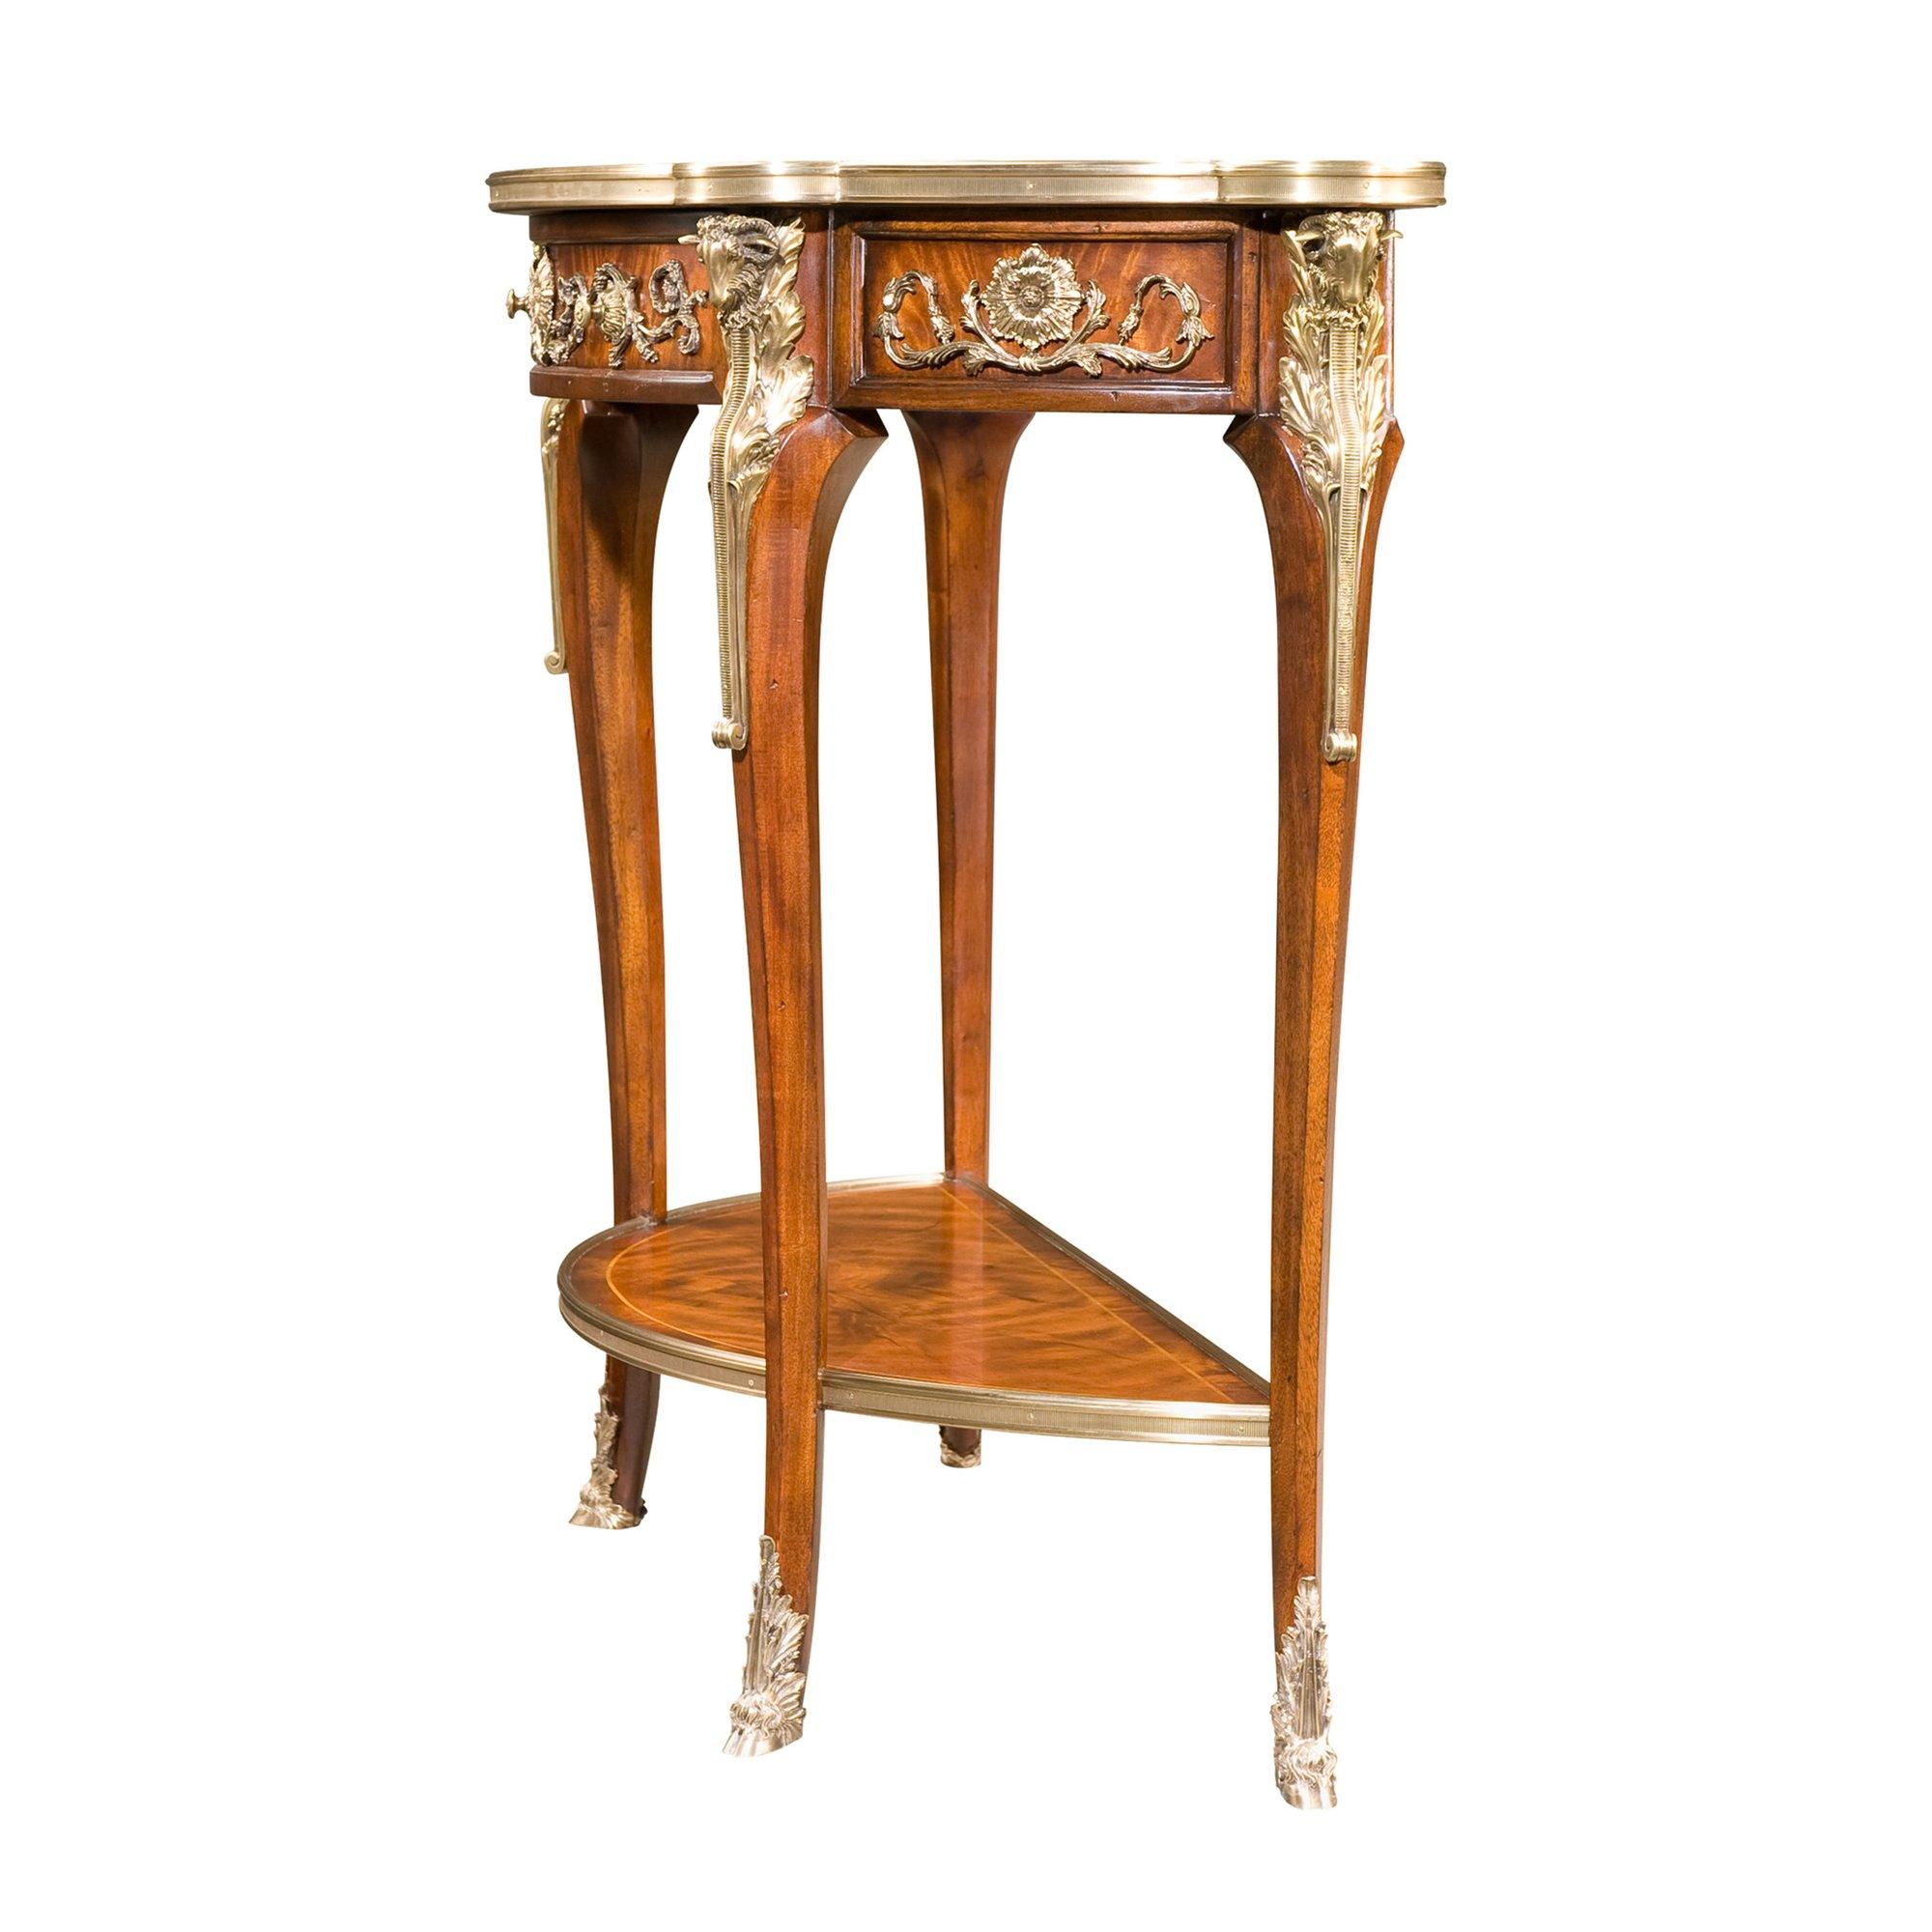 A mahogany and rosewood banded console table applied with very fine brass mounts, the brass bound top with a frieze drawer, on ram's head capital cabriole legs with hoof feet joined by an undertier.